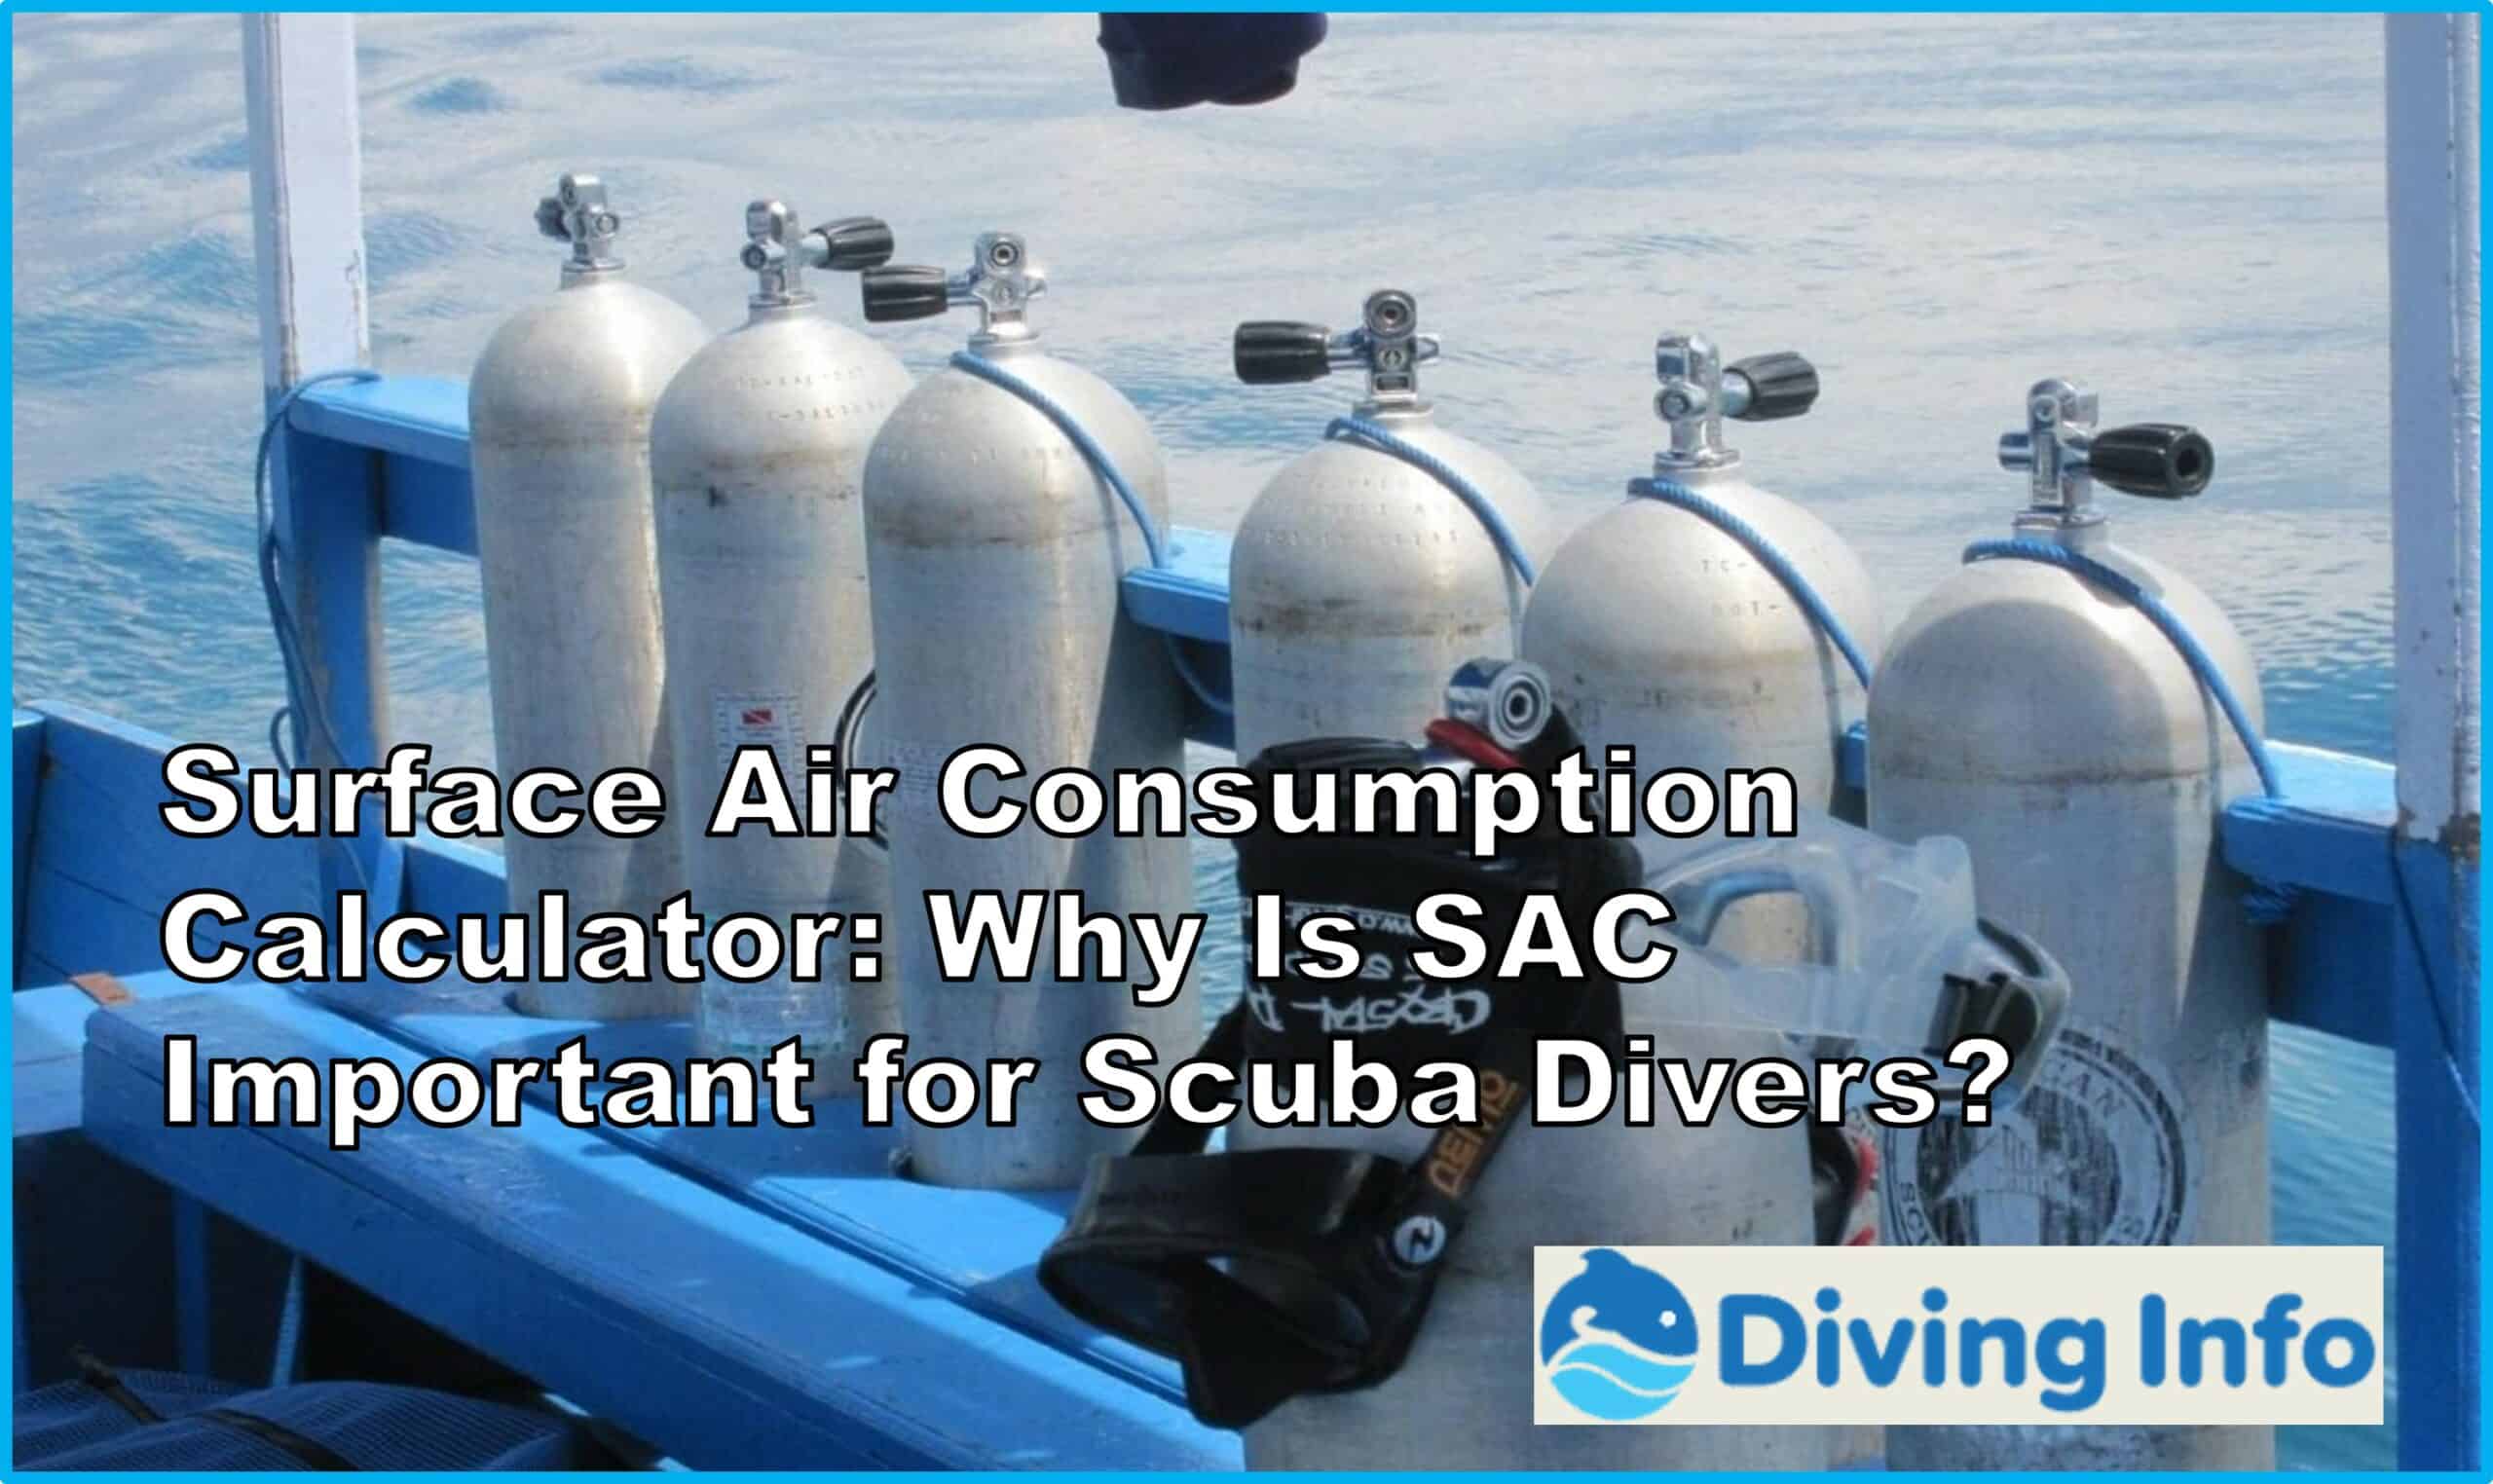 Surface Air Consumption Calculator Why Is SAC Important for Scuba Divers